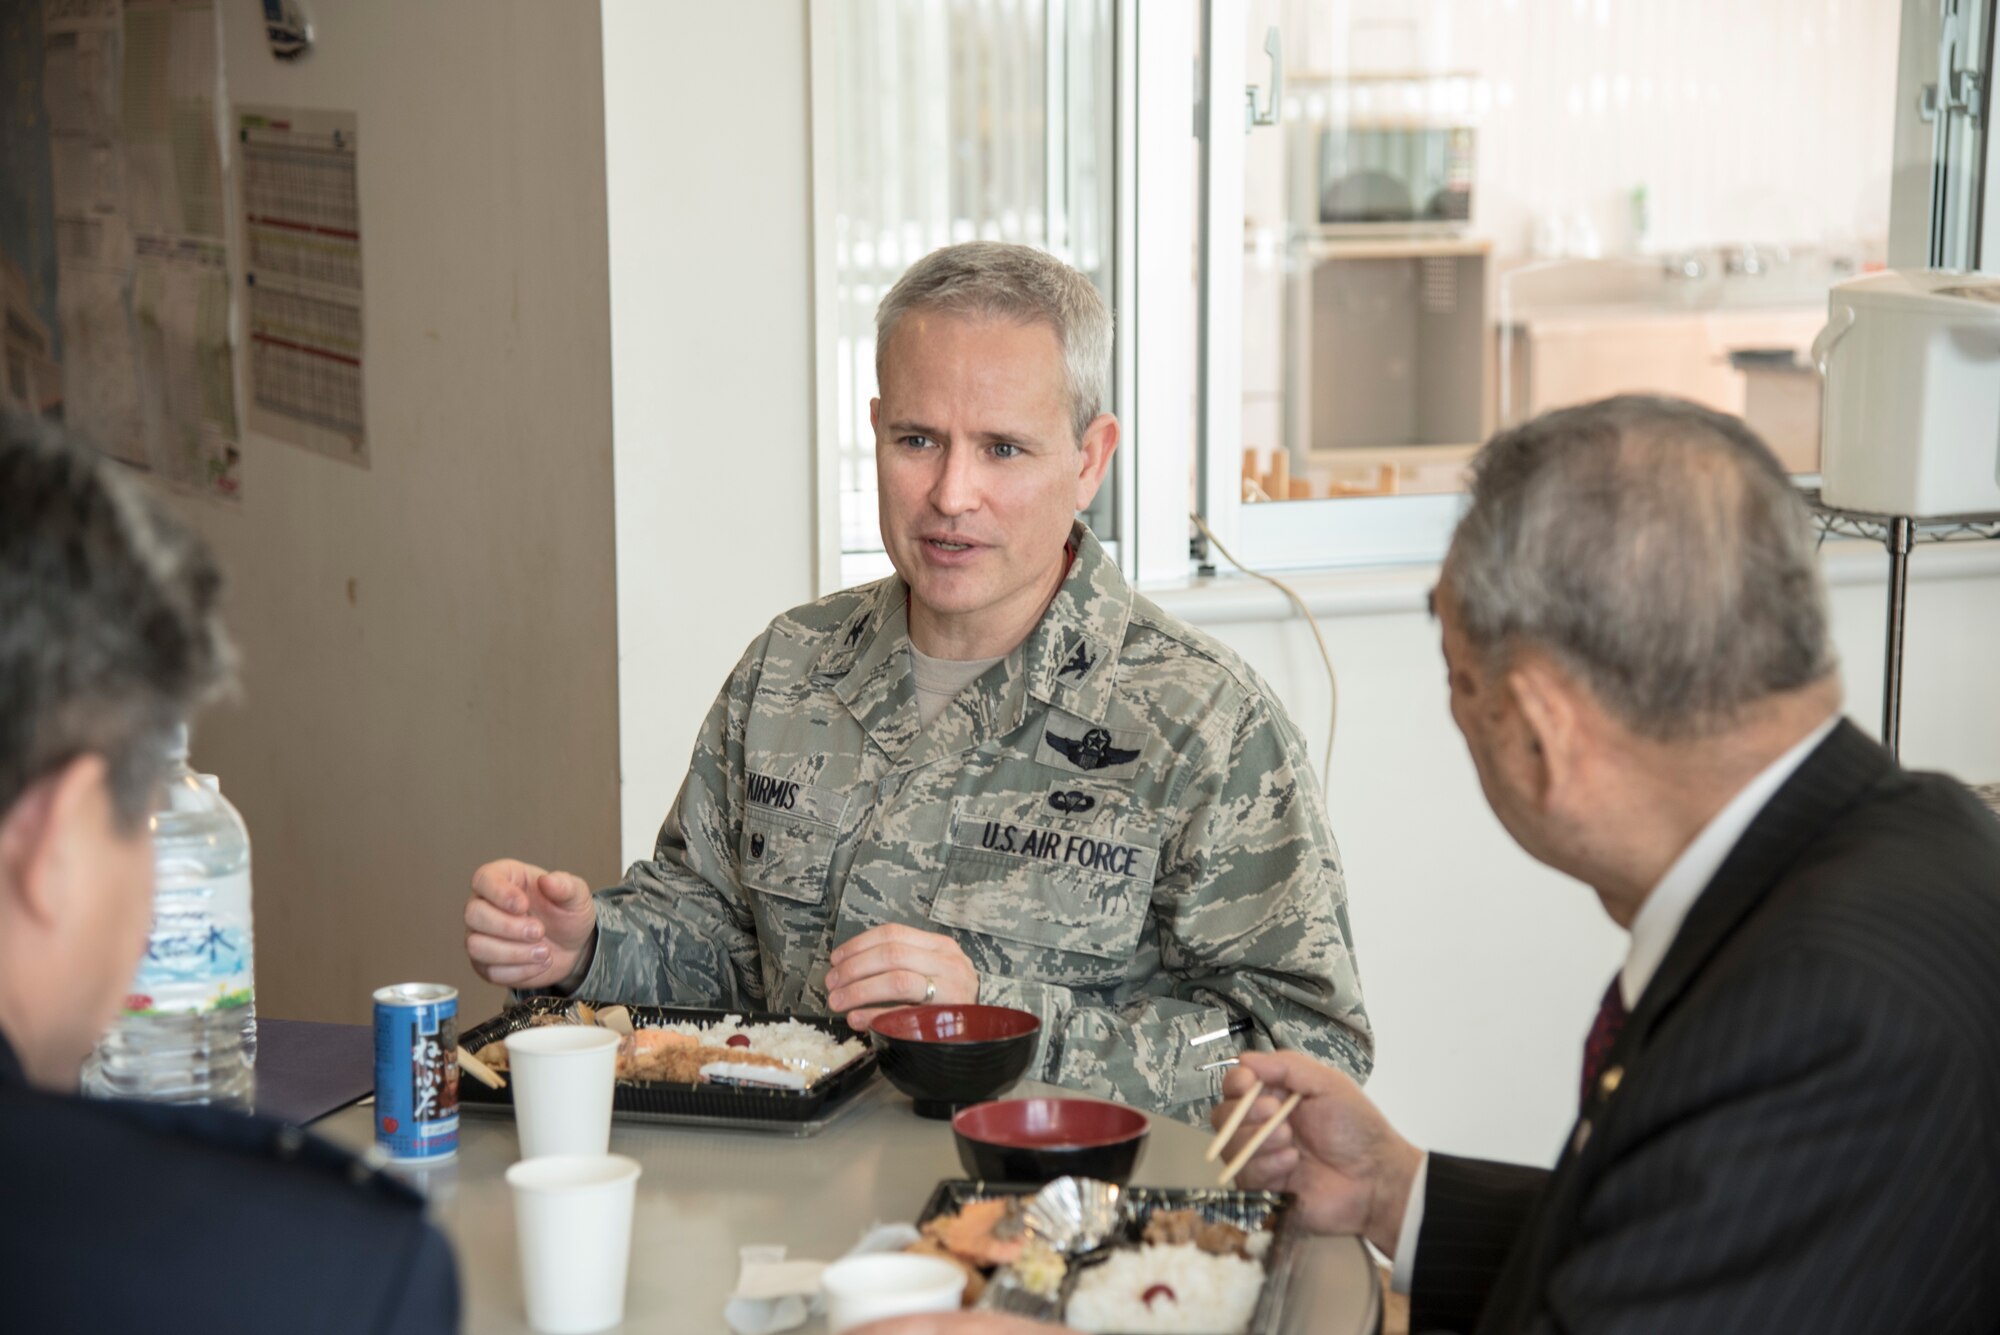 U.S. Air Force Col. Paul Kirmis, the 35th Fighter Wing vice commander, speaks with Japanese leaders during lunch after the annual Community Relations Advisory Council meeting at Misawa Air Base, Japan, Feb. 5, 2019.  The meeting discussed programs such as the English Camp and Misawa Kids Center that improve the community and bilateral relations by bringing Japanese and Americans together. (U.S. Air Force photo by Branden Yamada)